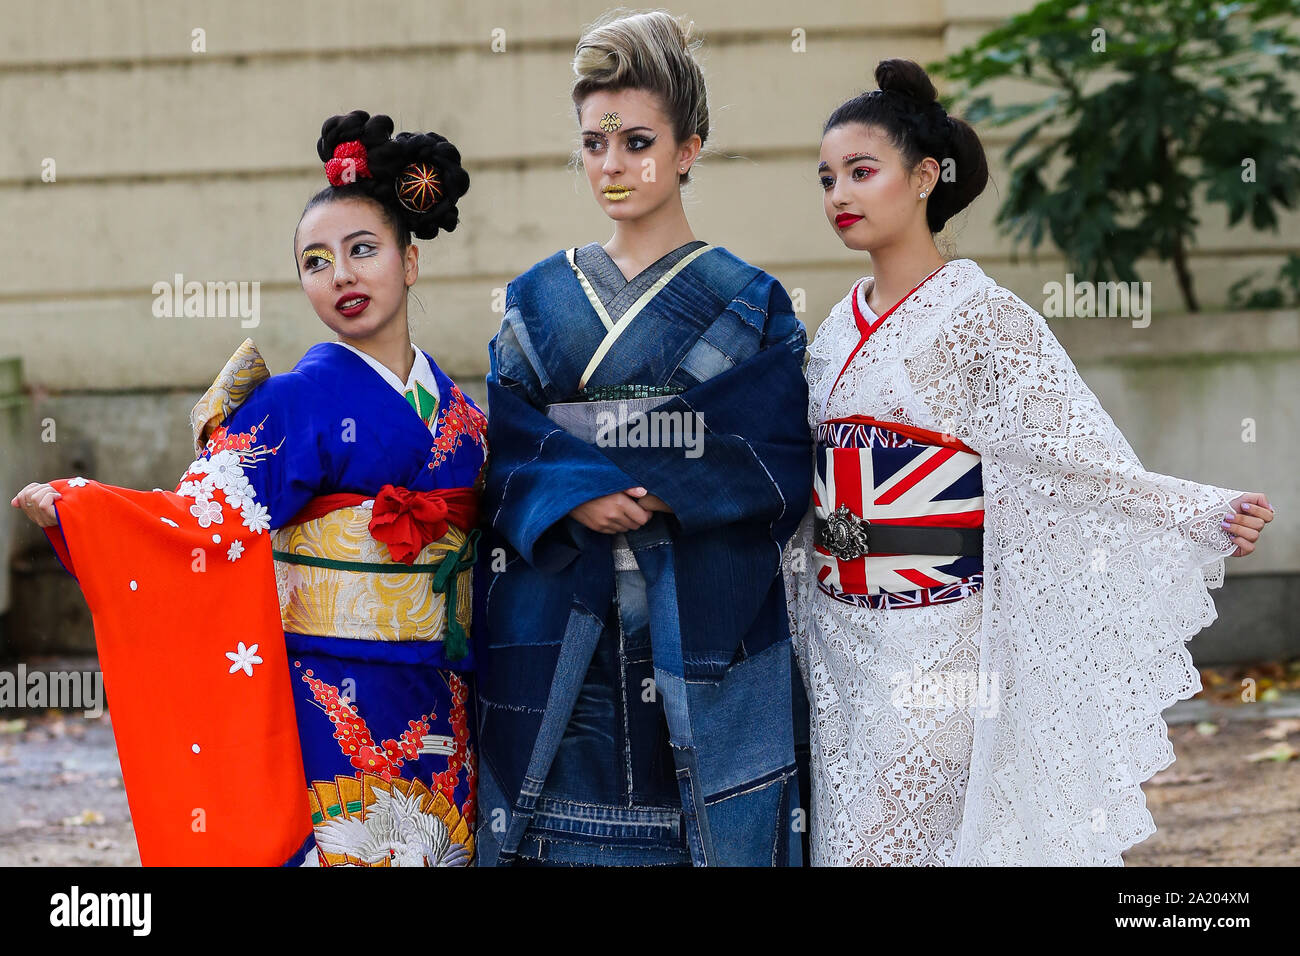 London, UK. 29th Sep, 2019. Performers are seen in Japanese costume during the annual Japan Matsuri festival.Festival of Japanese music, food and culture in London's Trafalgar Square, UK. Credit: SOPA Images Limited/Alamy Live News Stock Photo